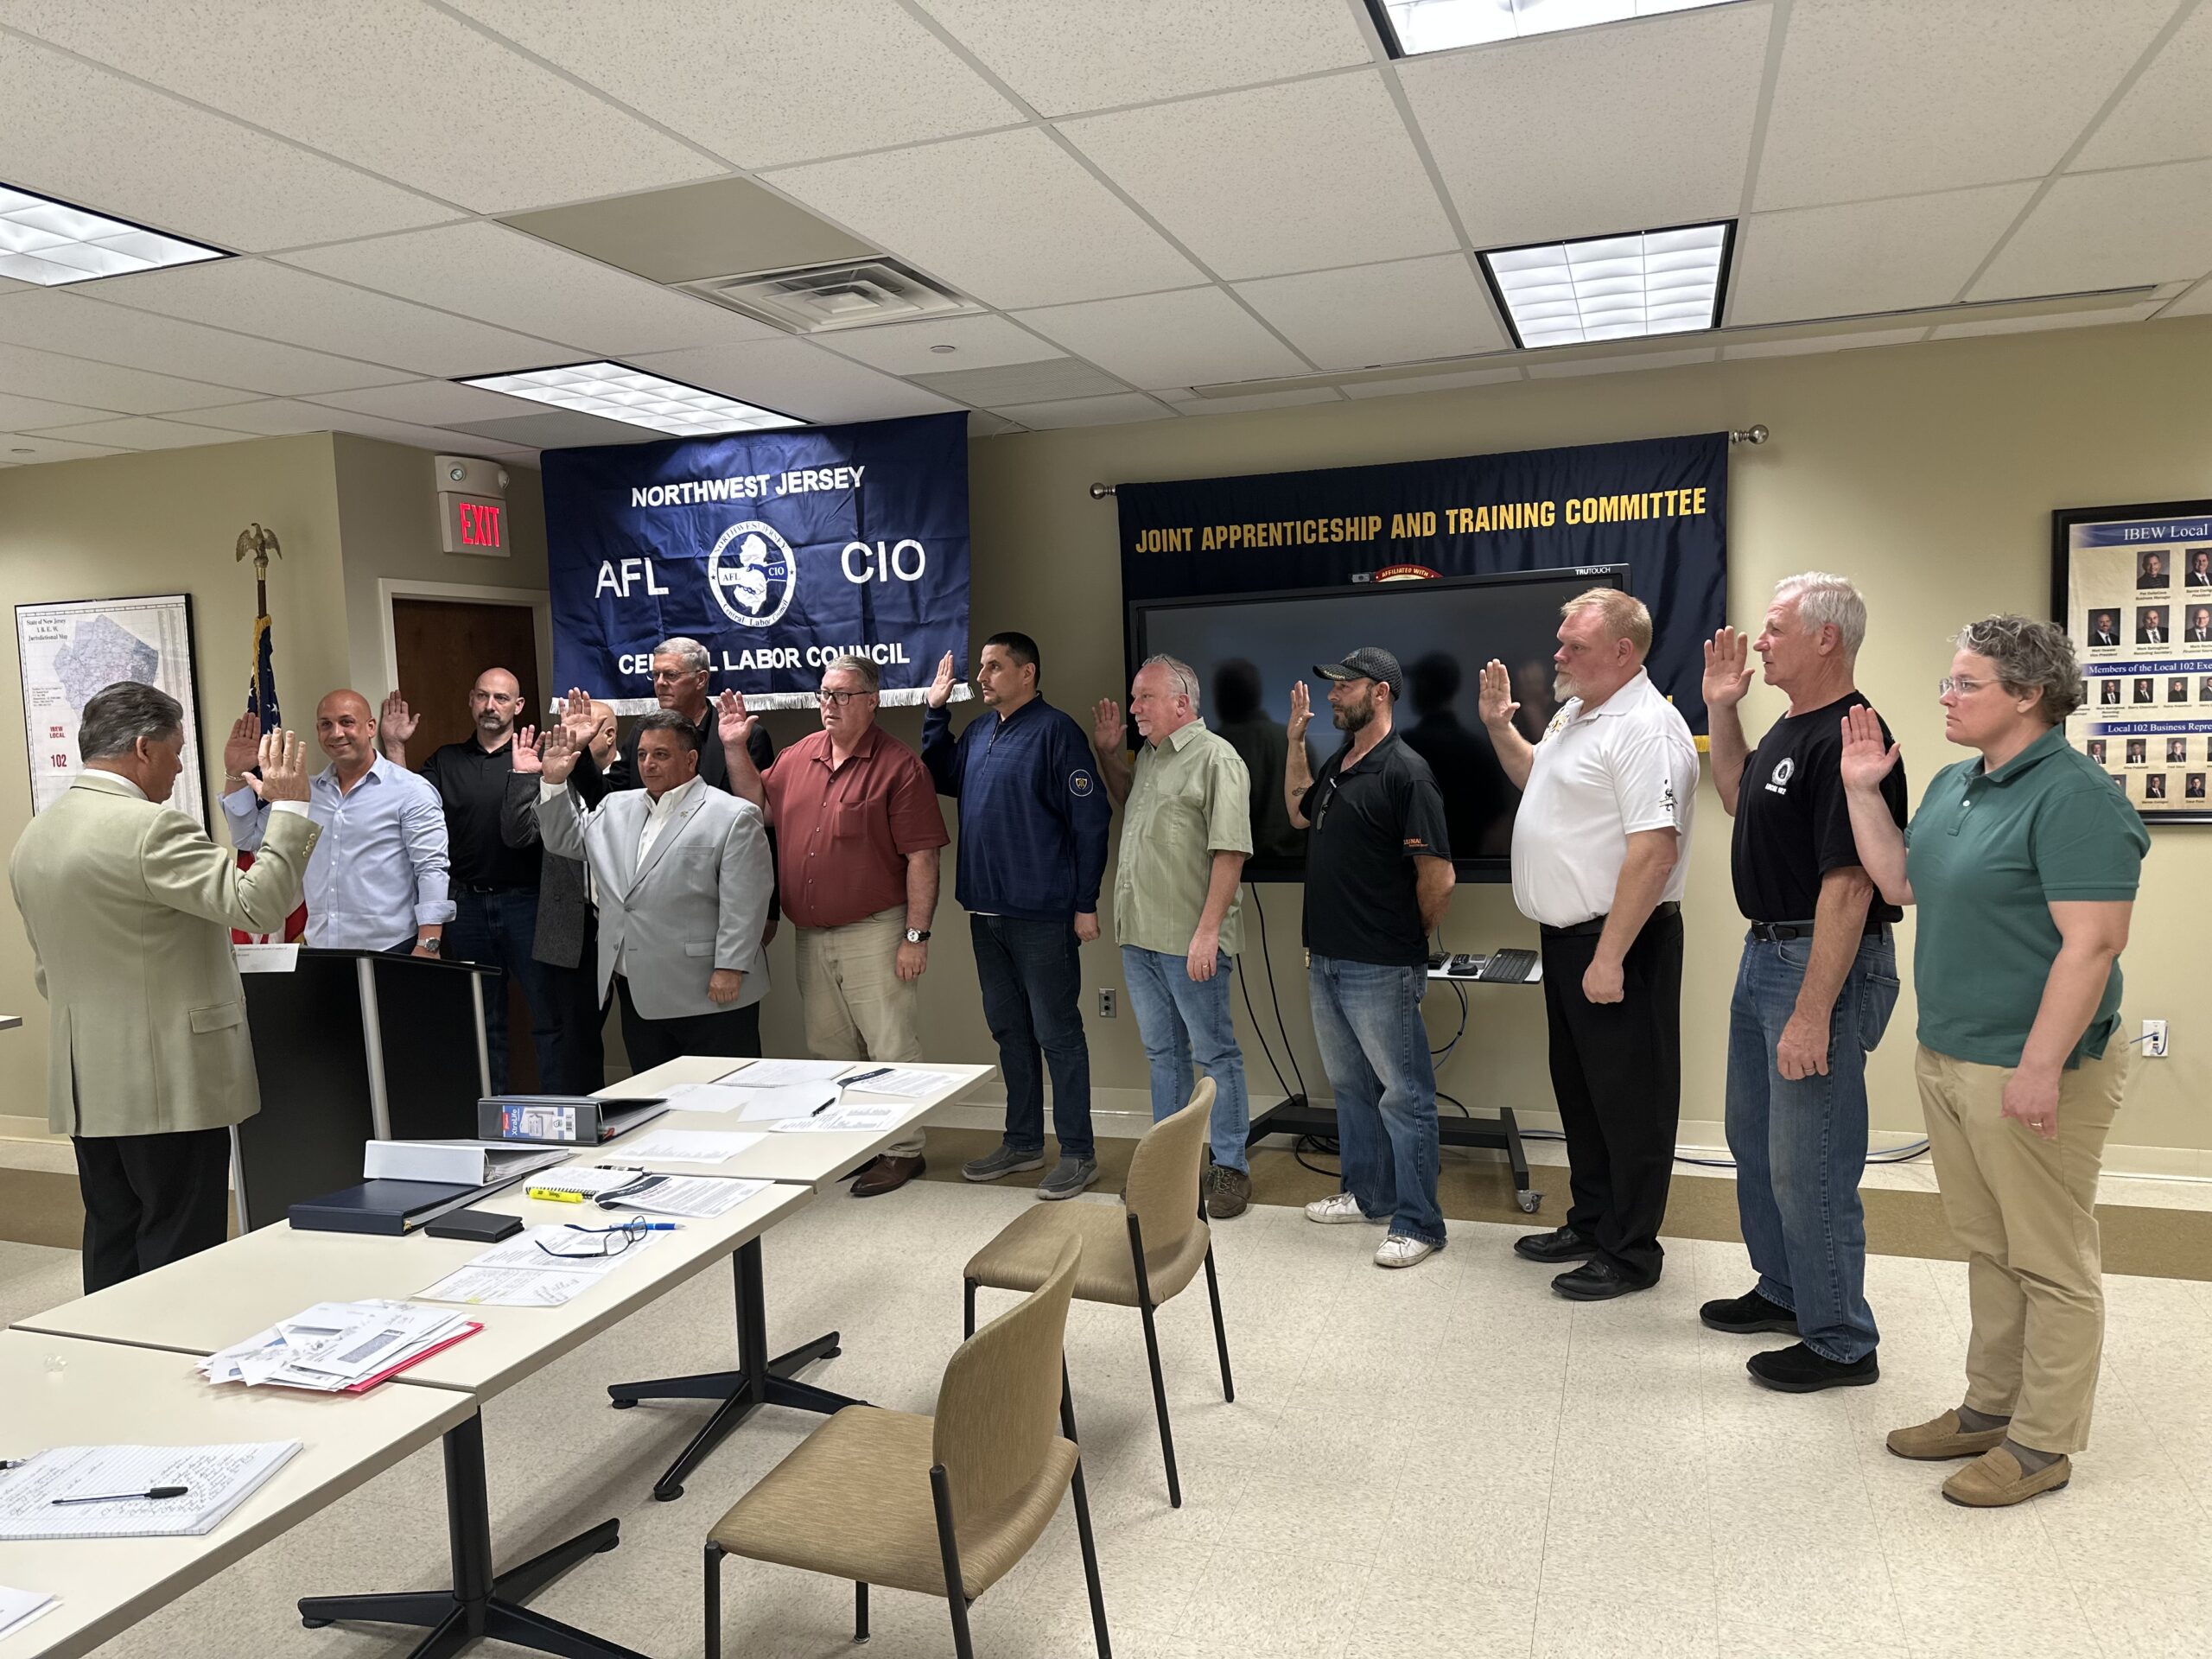 NJ AFL-CIO President Charles Wowkanech swearing in Local 25 Eboard Member and Organizer, Gregory Conte as Secretary-Treasurer to the NWCLC (Northwest Central Labor Council)